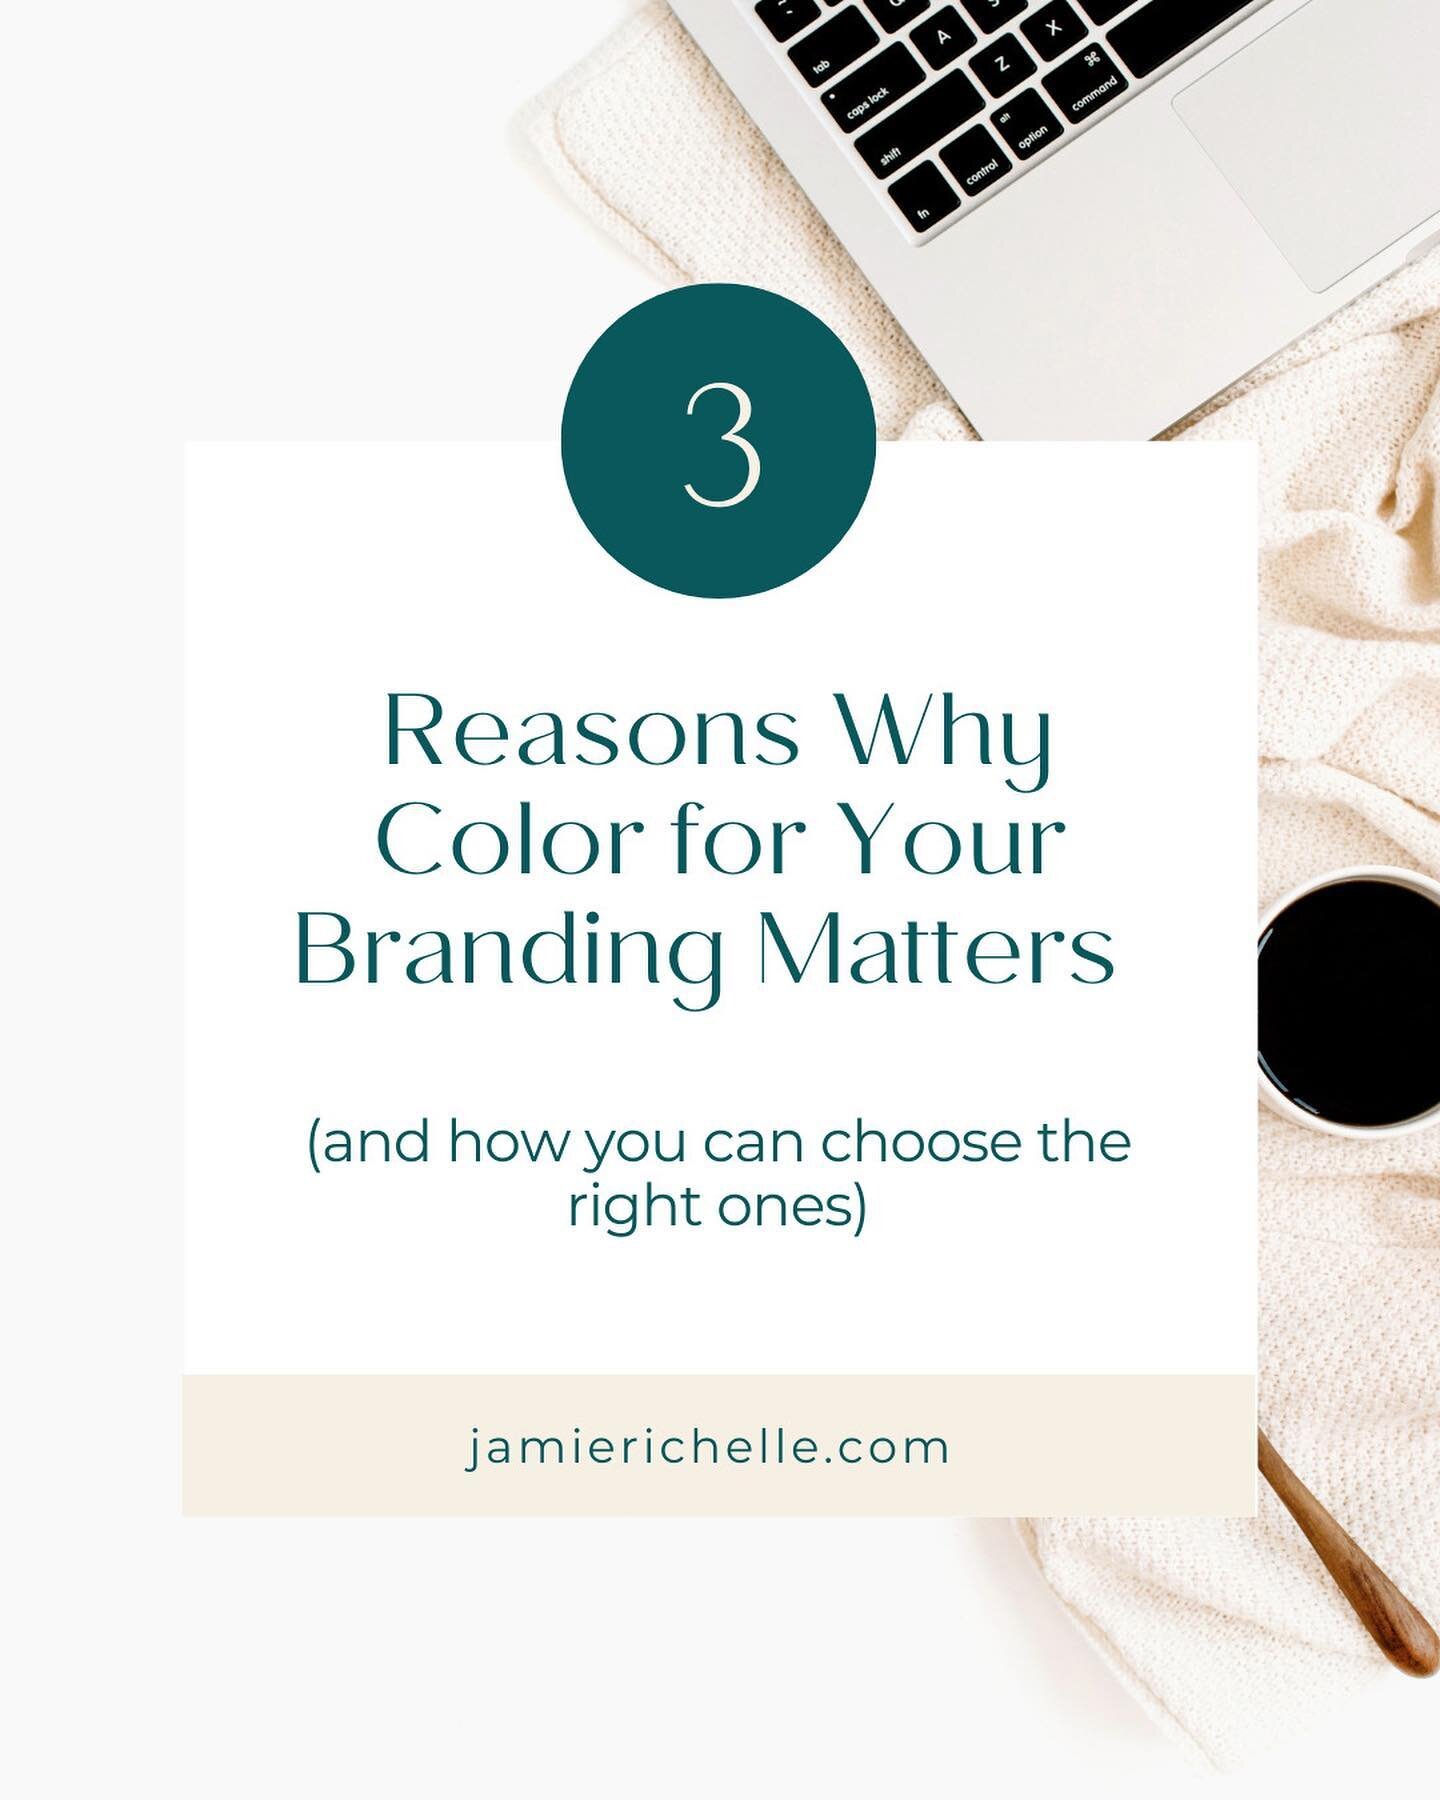 Color is so important when it comes to your brand. Swipe to learn more!